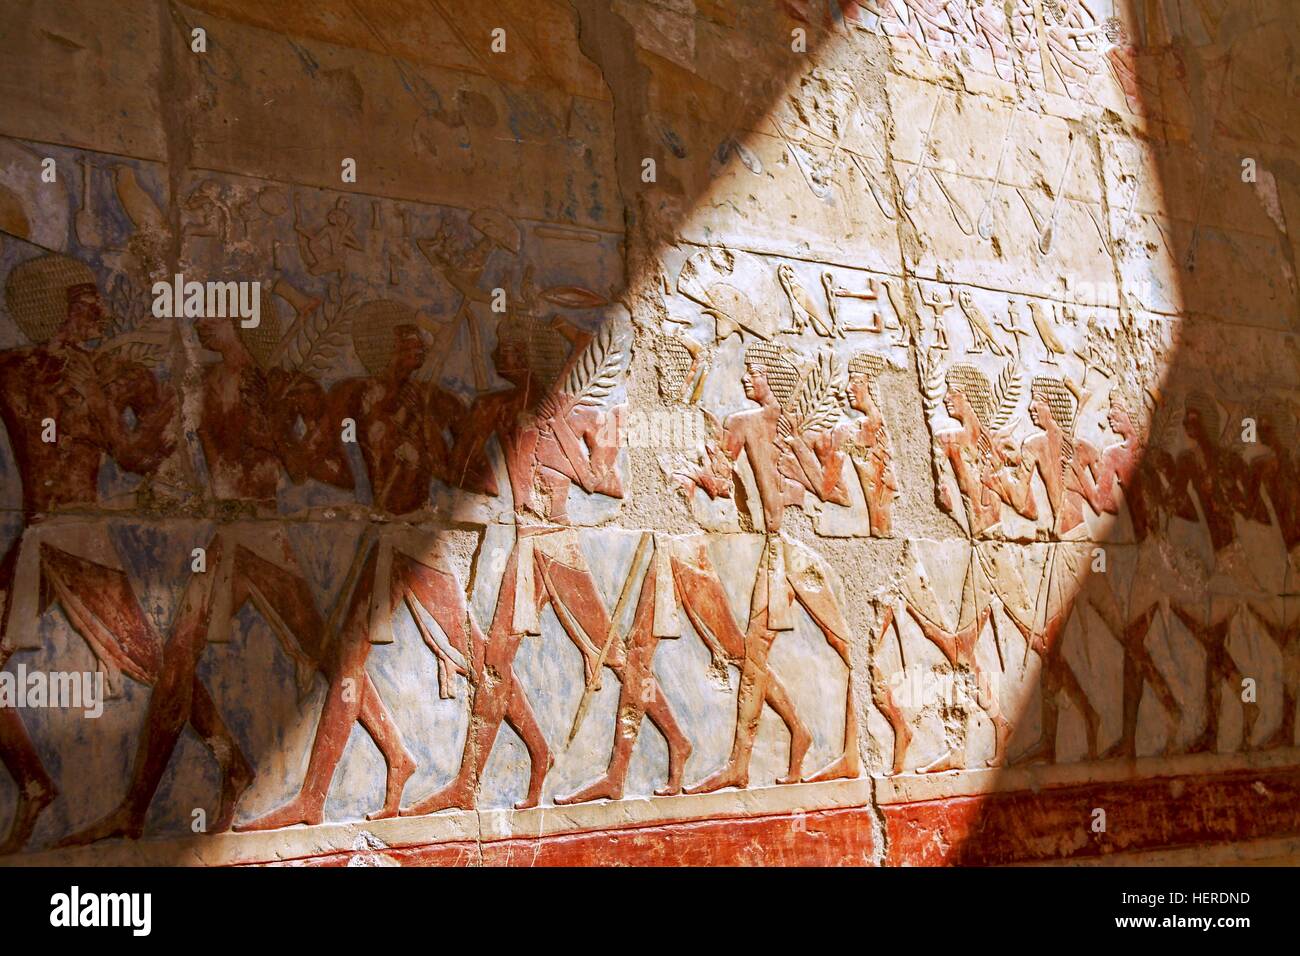 Ancient Egyptian Wall Mural Carving Paintings inside Queen Hatshepsut Temple in Valley of the Kings near Luxor, Egypt Stock Photo